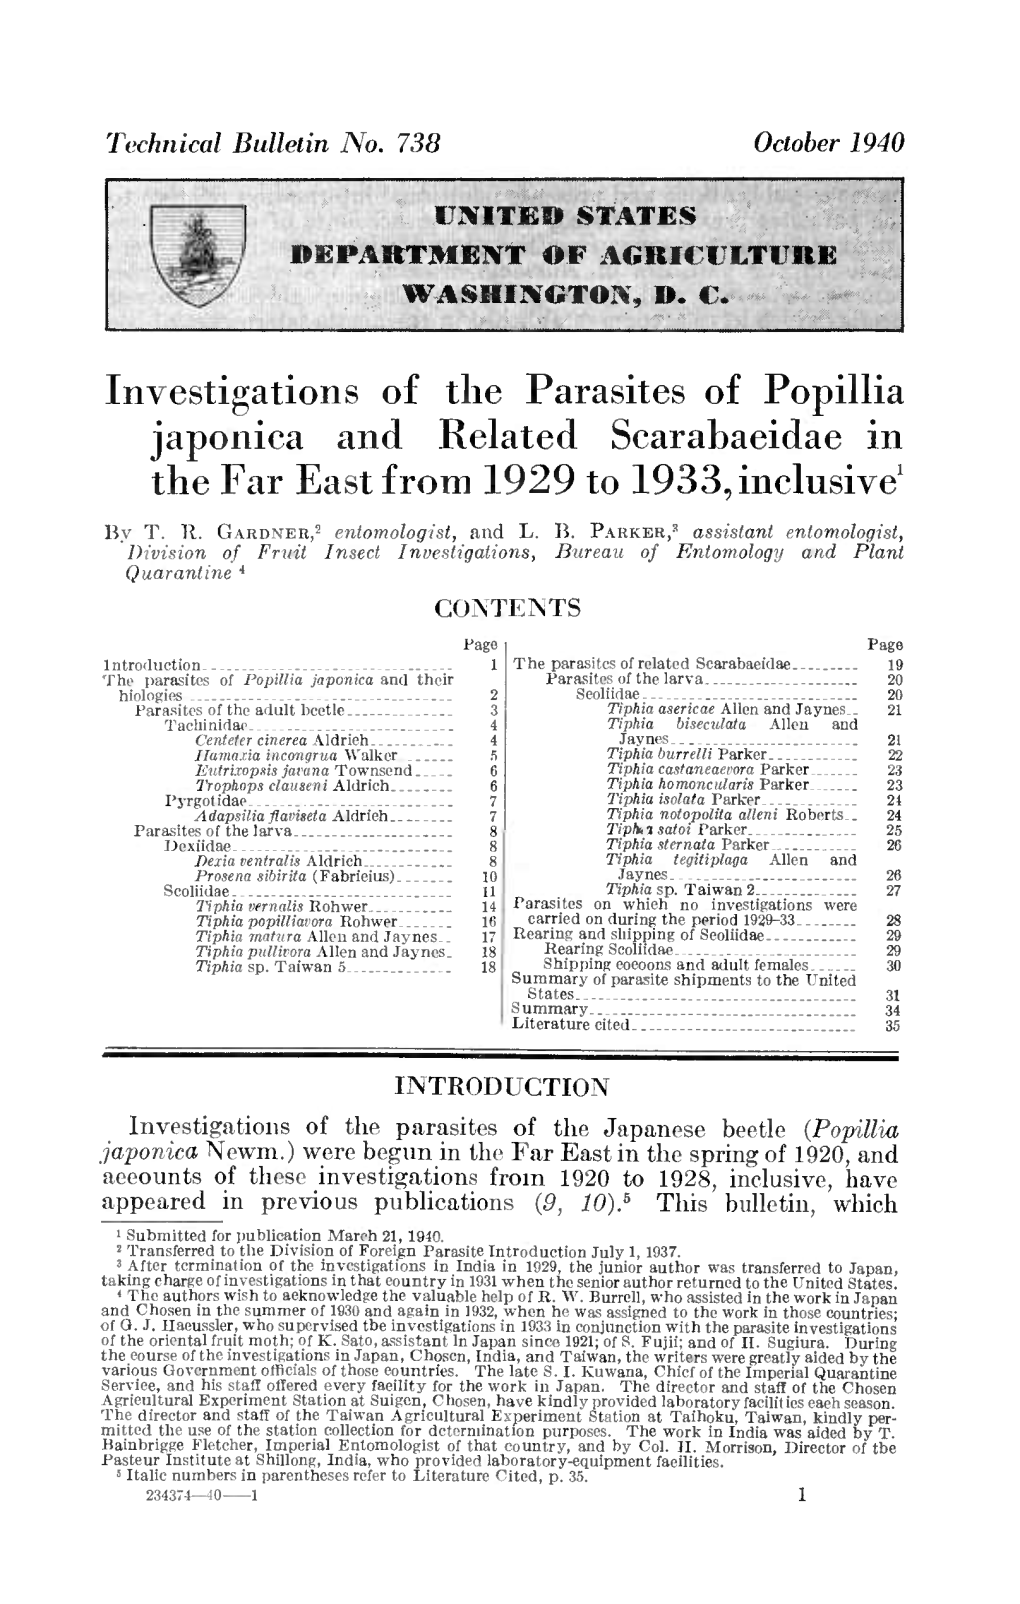 Investigations of the Parasites of Popillia Japónica and Related Scarabaeidae in the Far East from 1929 to 1933, Inclusive'